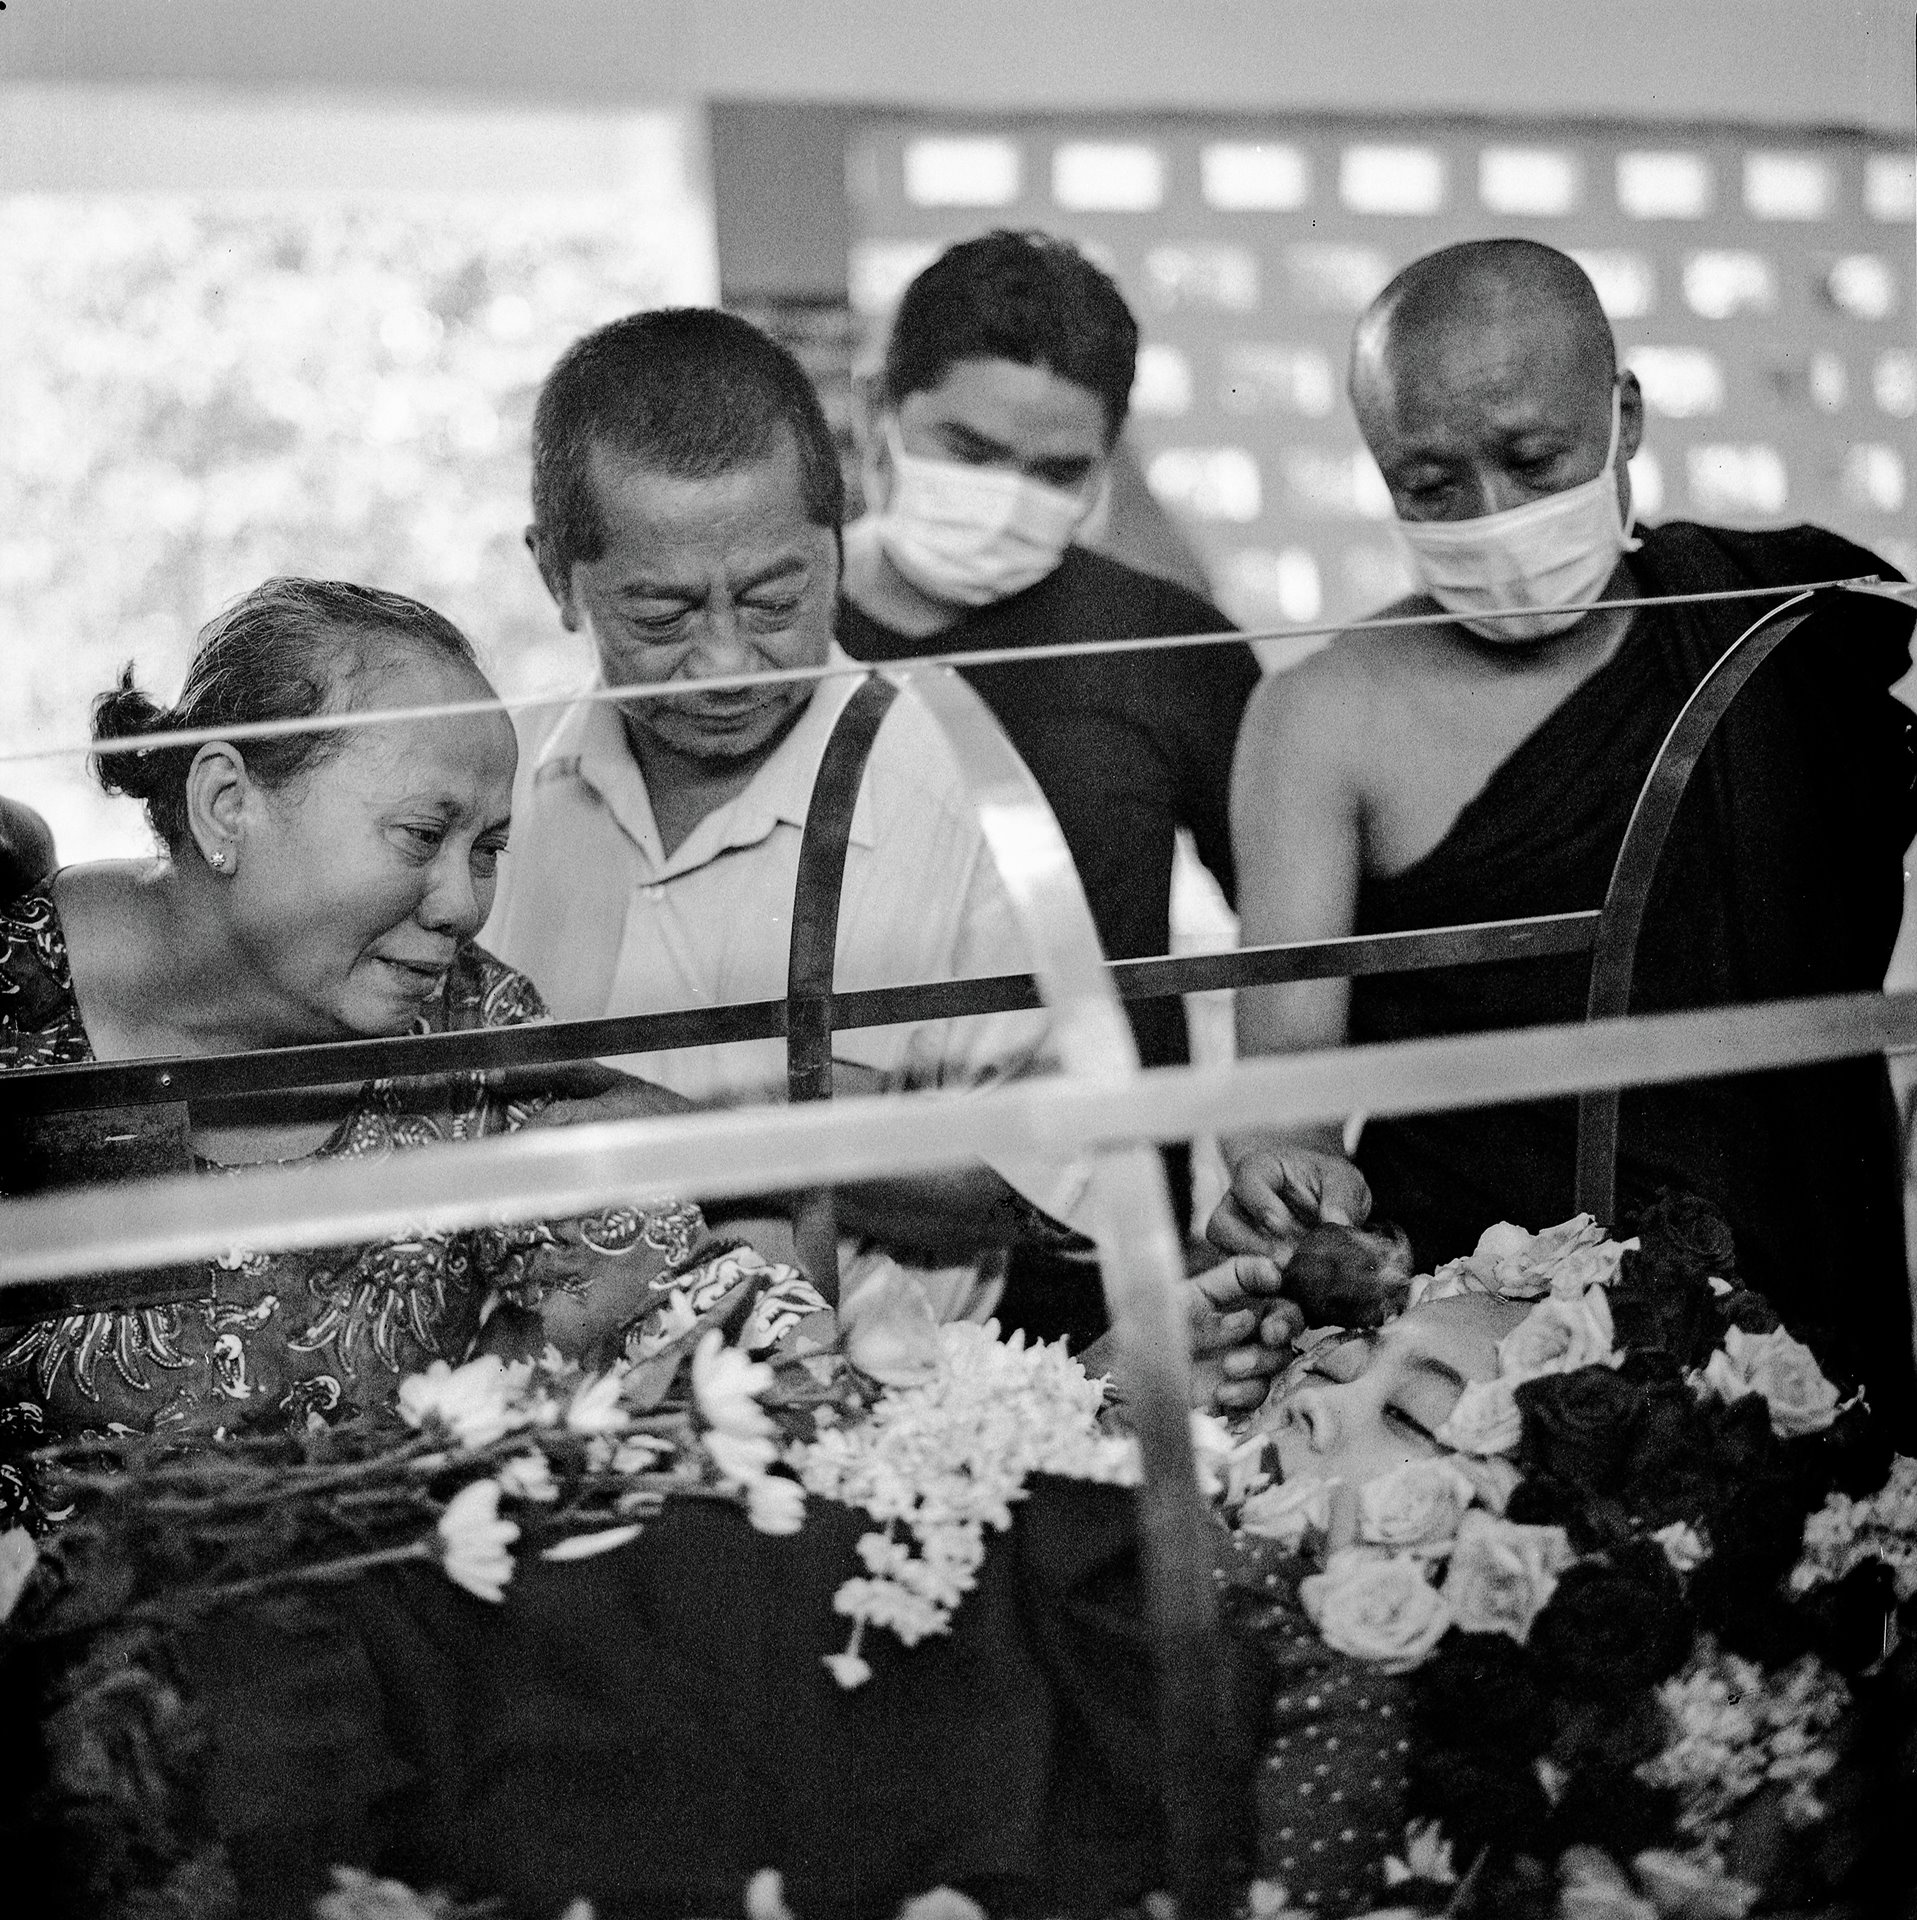 The mother of Su Su Kyi mourns during her funeral service in Yangon, Myanmar. Su Su Kyi, who was employed by a bank, was shot in the head by the military while traveling in a company vehicle on 30 March 2021.